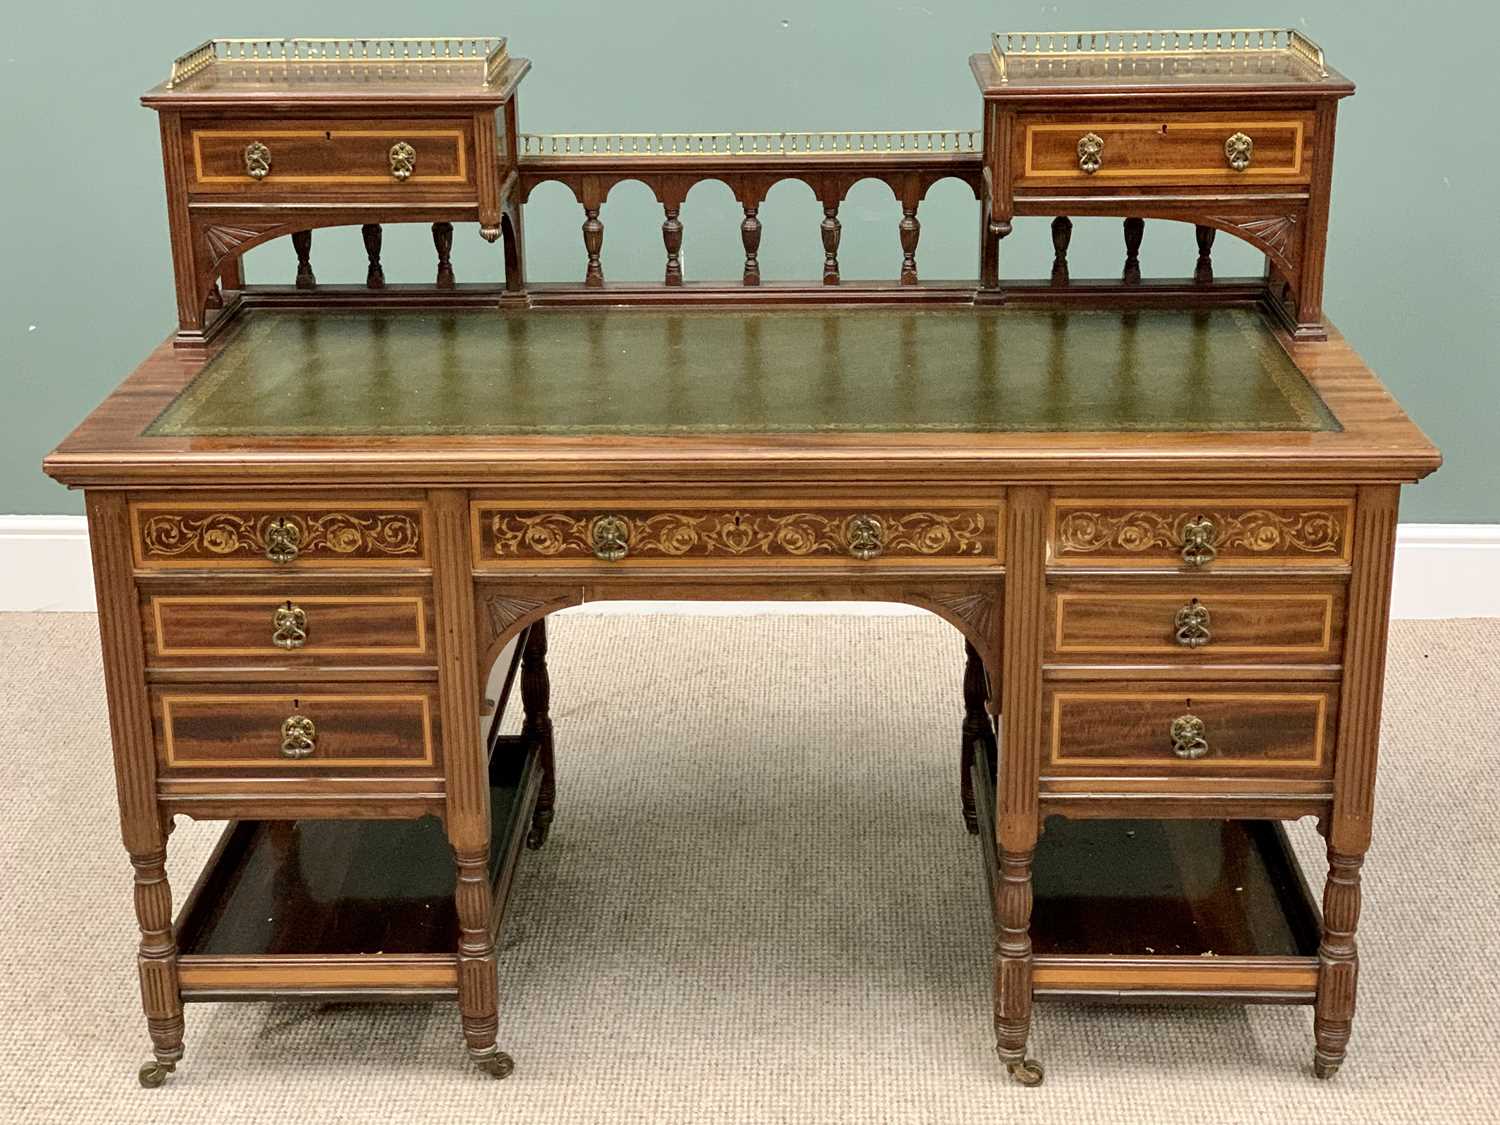 MAHOGANY DESK - fine twin pedestal example with railback and elevated drawers, inlaid detail